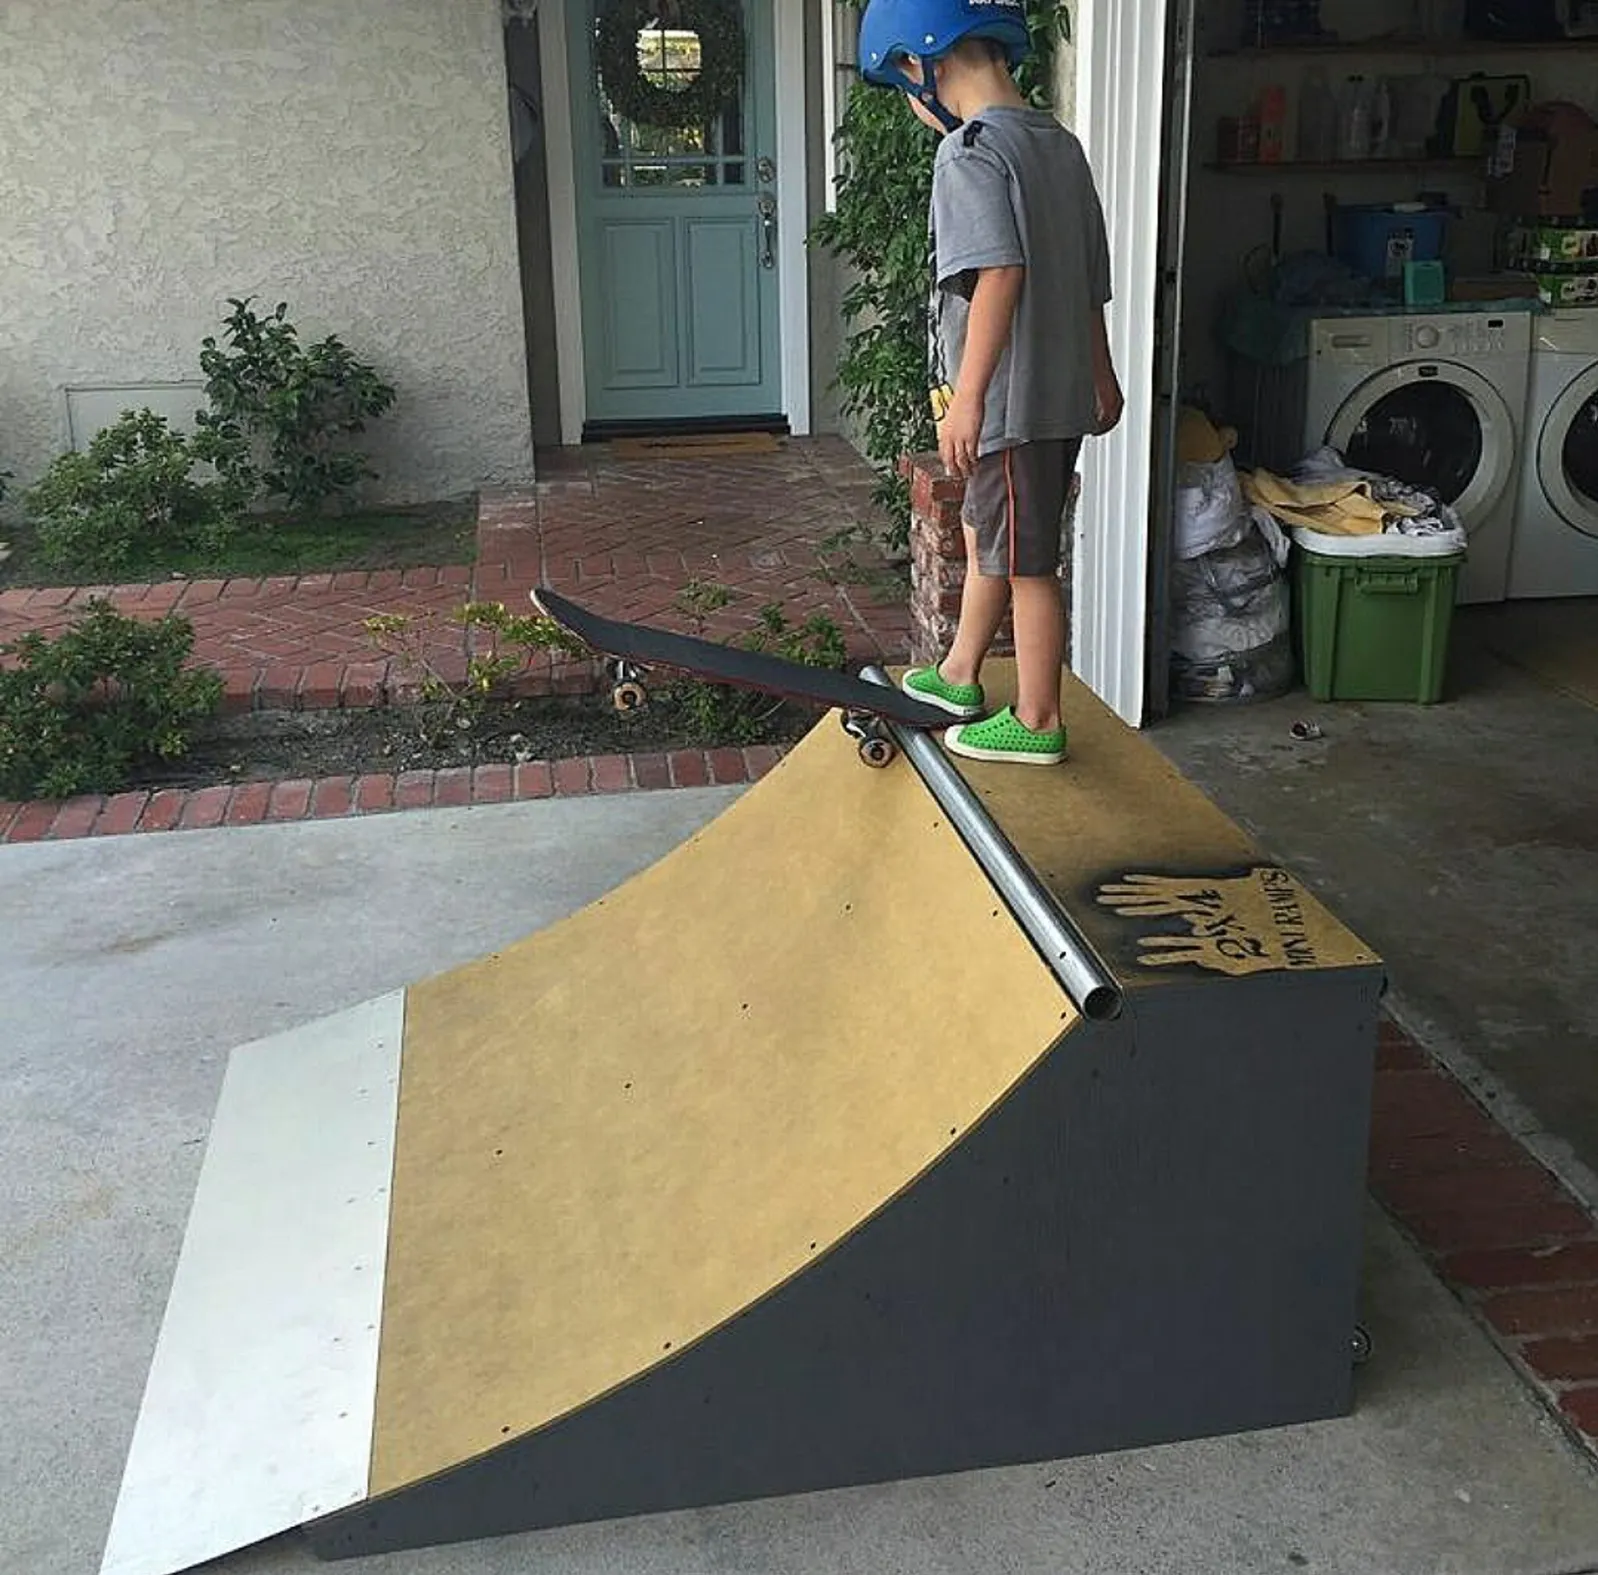 Child of deck on two foot high by four foot wide quarter pipe, preparing to drop in